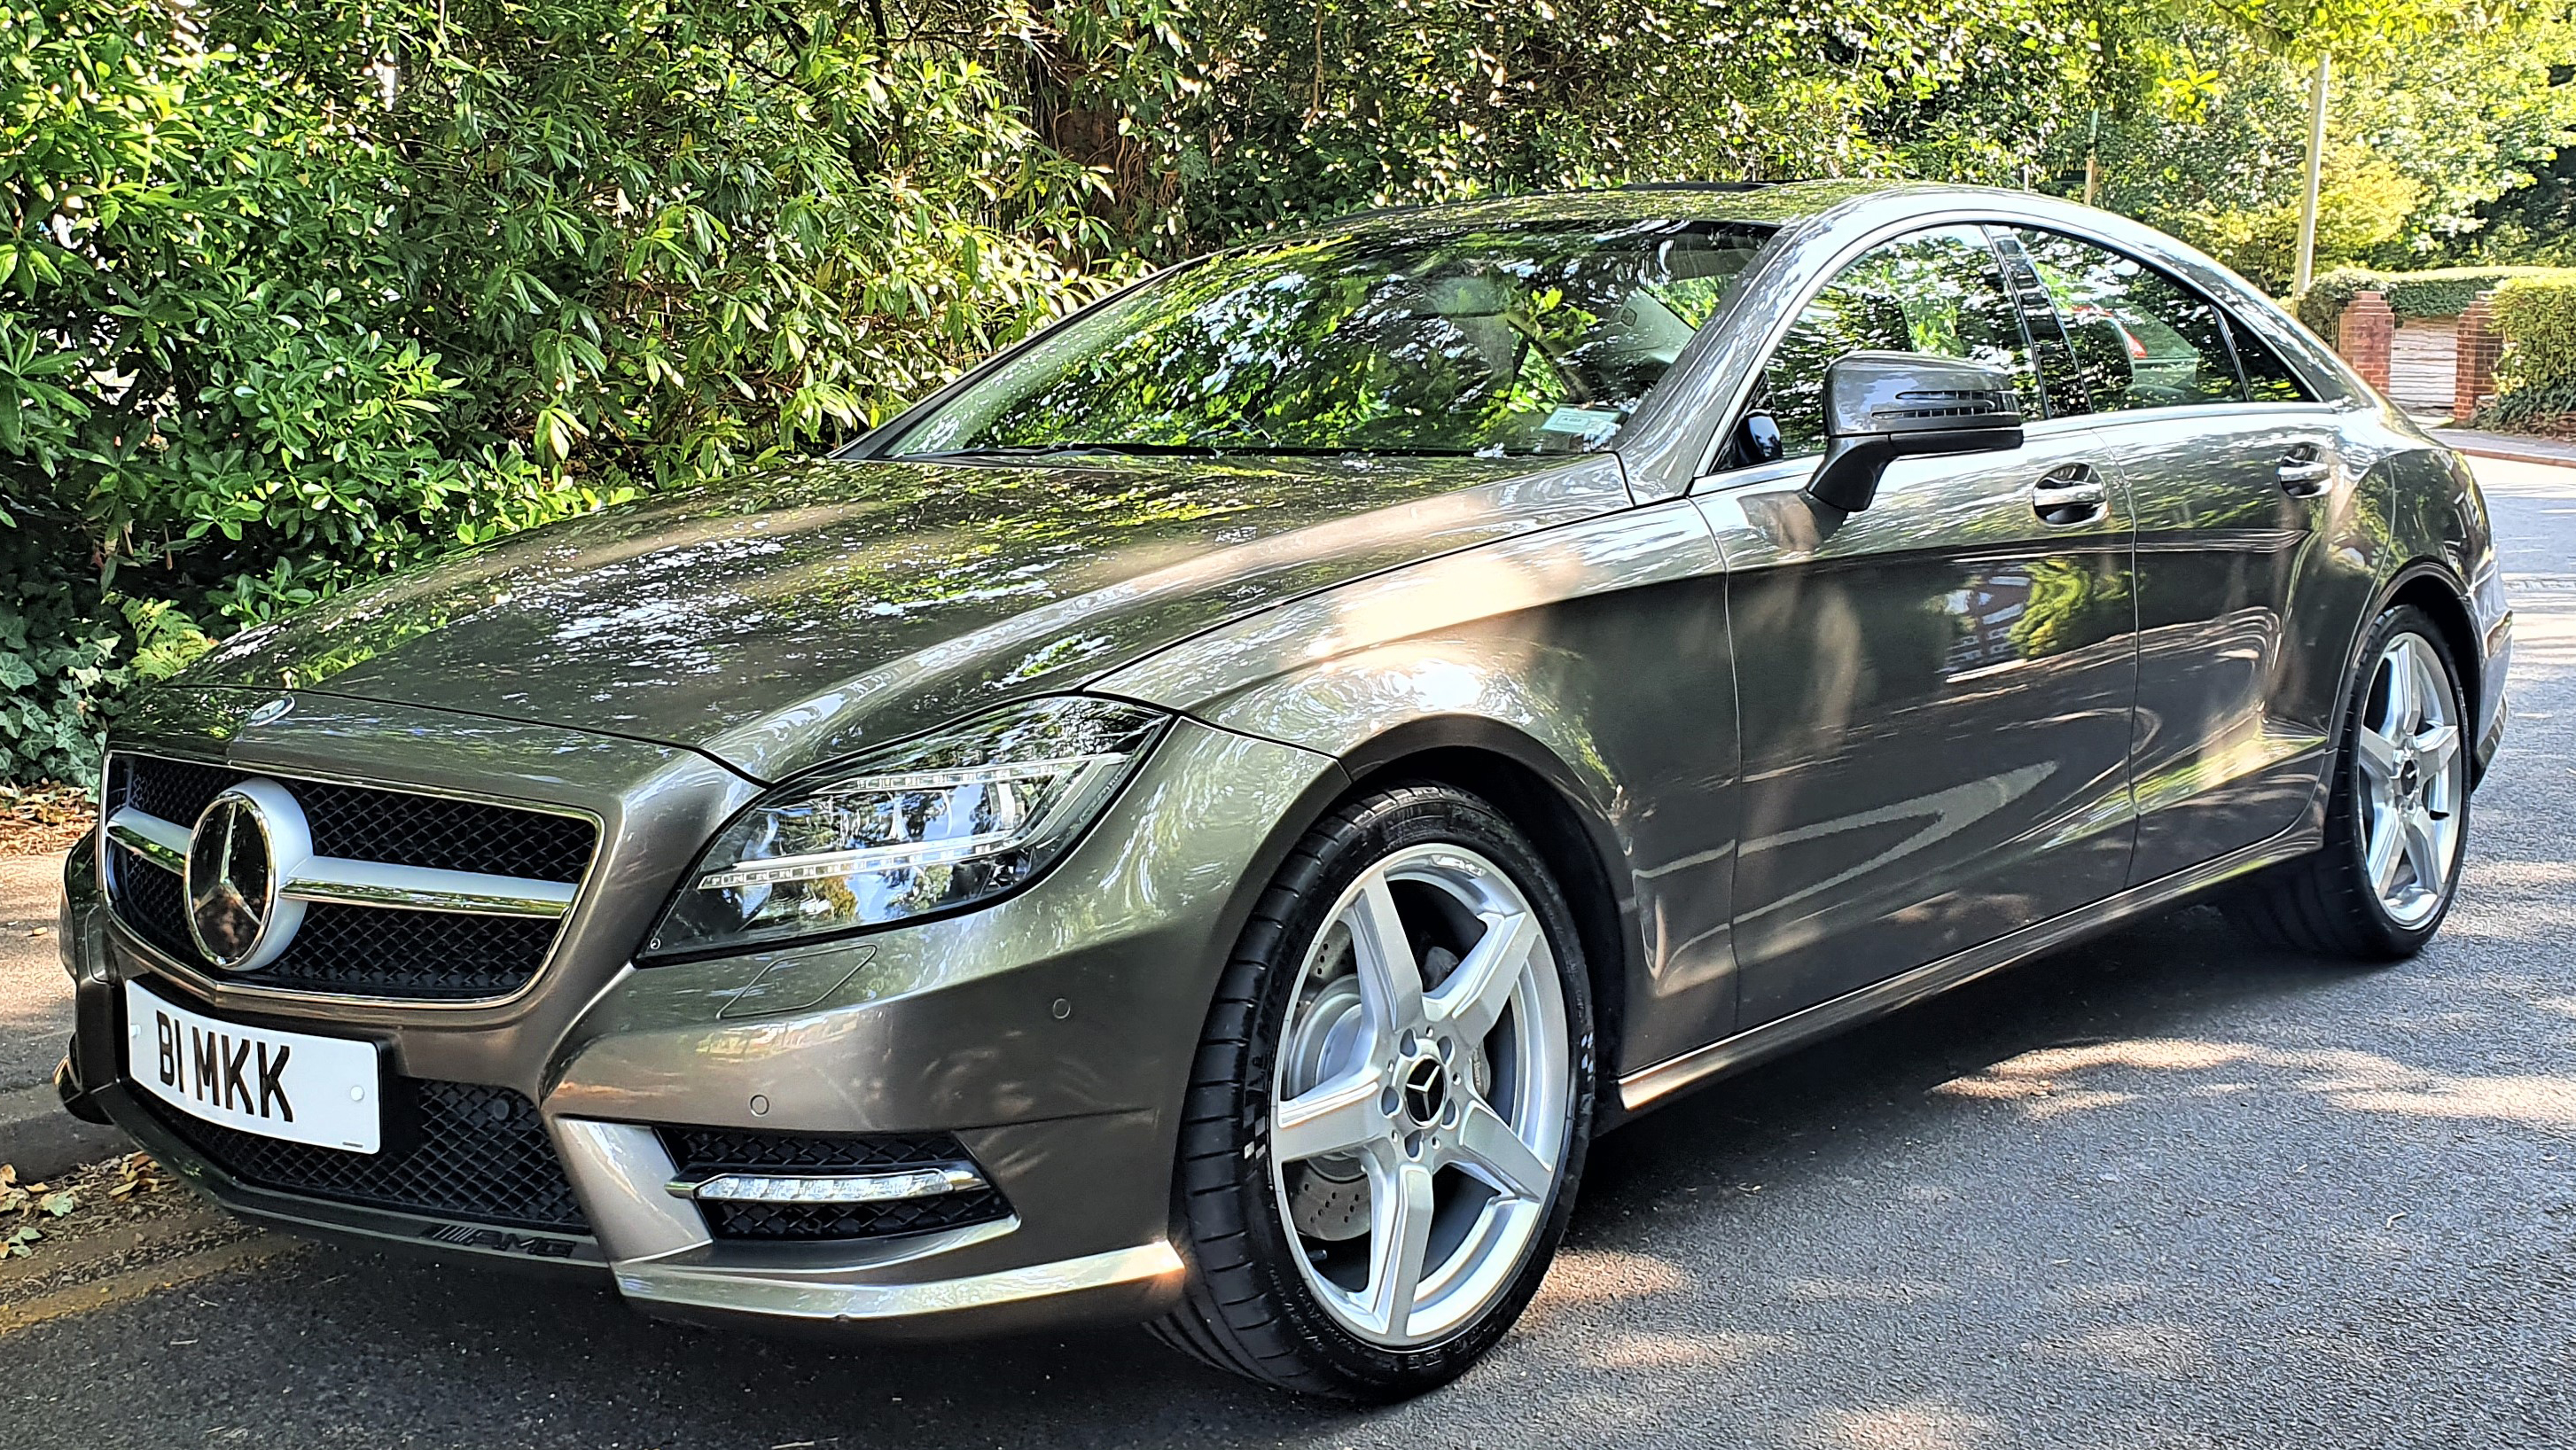 Mercedes CLS 350 AMG Sport wedding car for hire in Bournemouth, Dorset